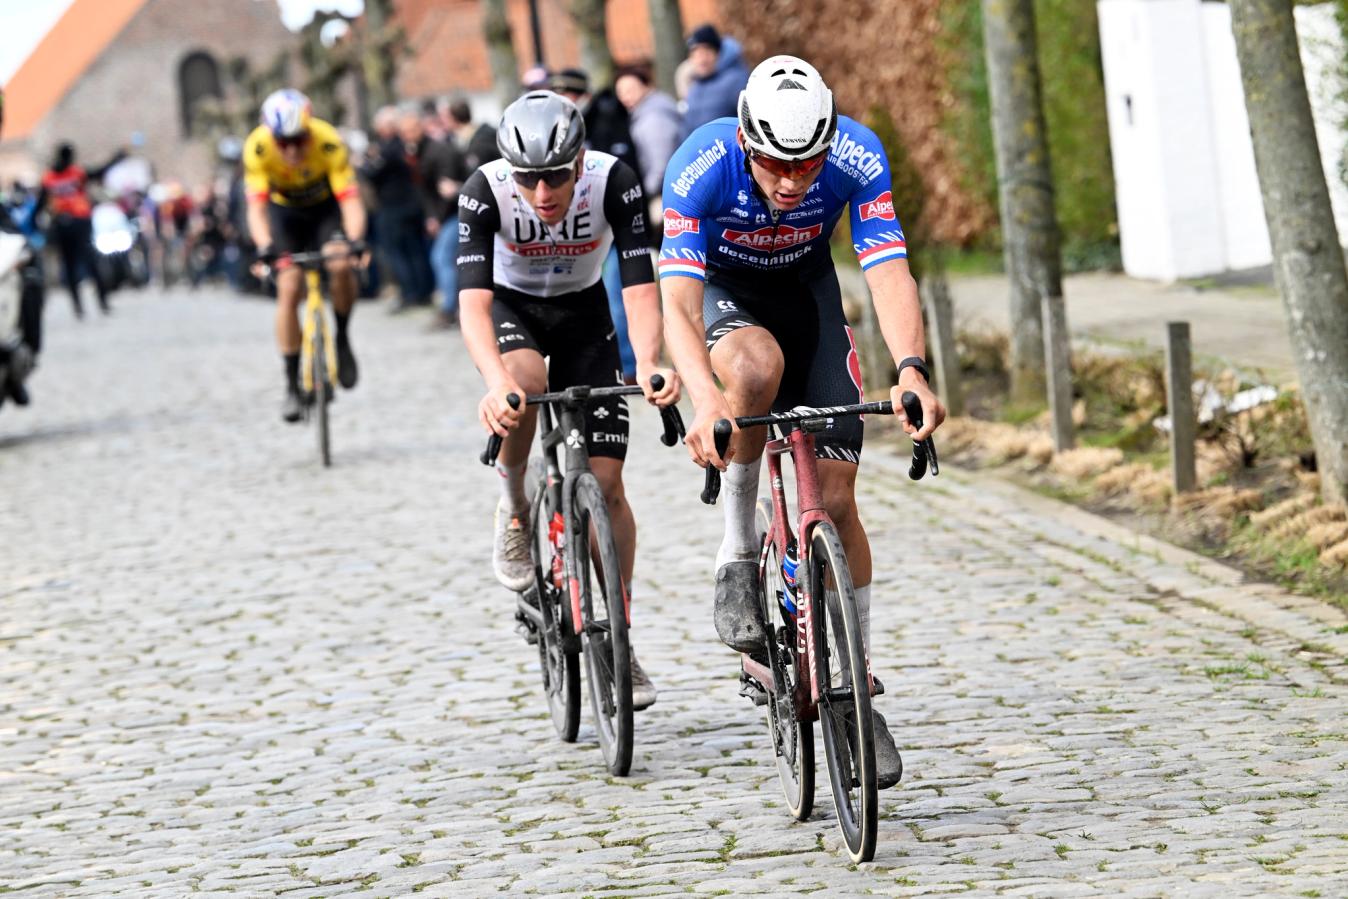 Mathieu van der Poel and Tadej Pogačar briefly dropped Wout van Aert in last year’s race, but the Belgian responded well and won the eventual three-up sprint